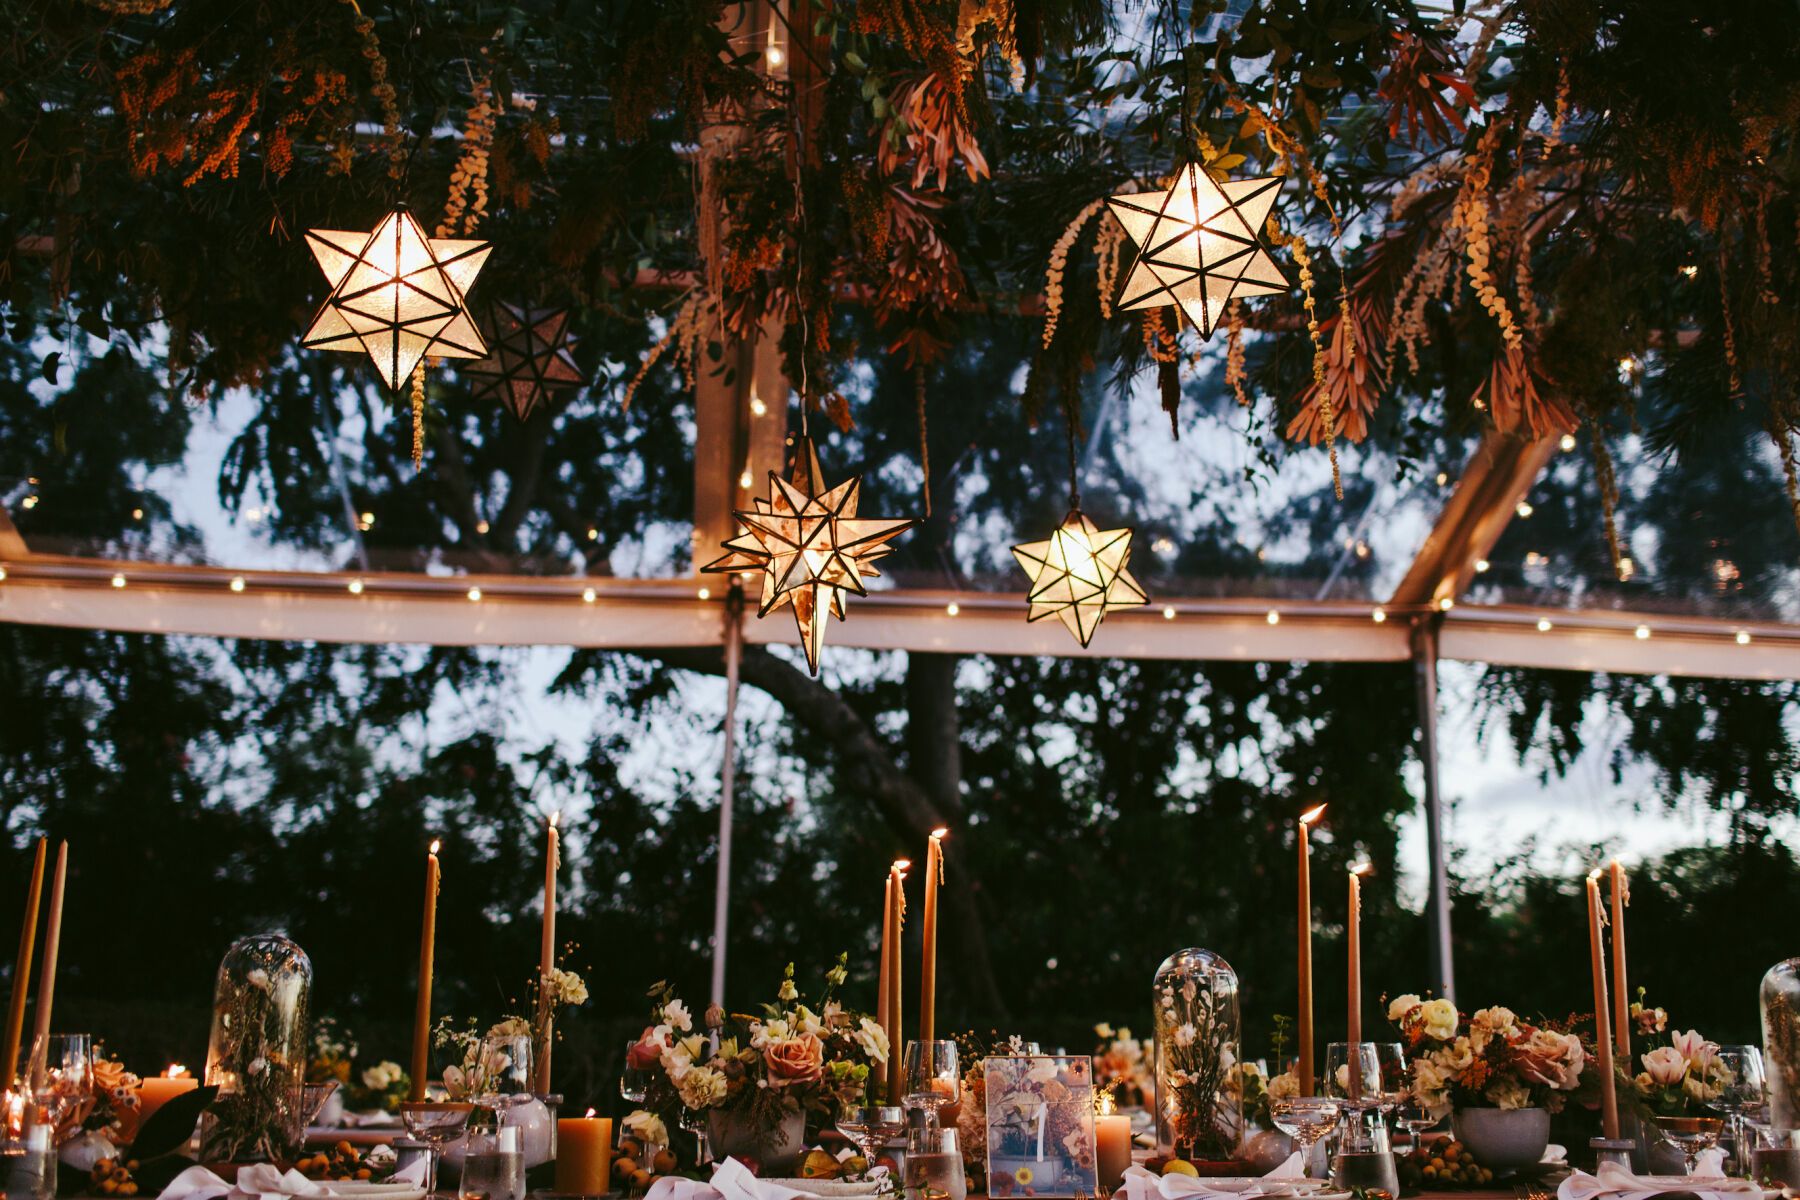 Tented Wedding Ideas: Inside of a tented wedding reception at dusk, featuring a clear-top tent with hanging geometric glowing lanterns 